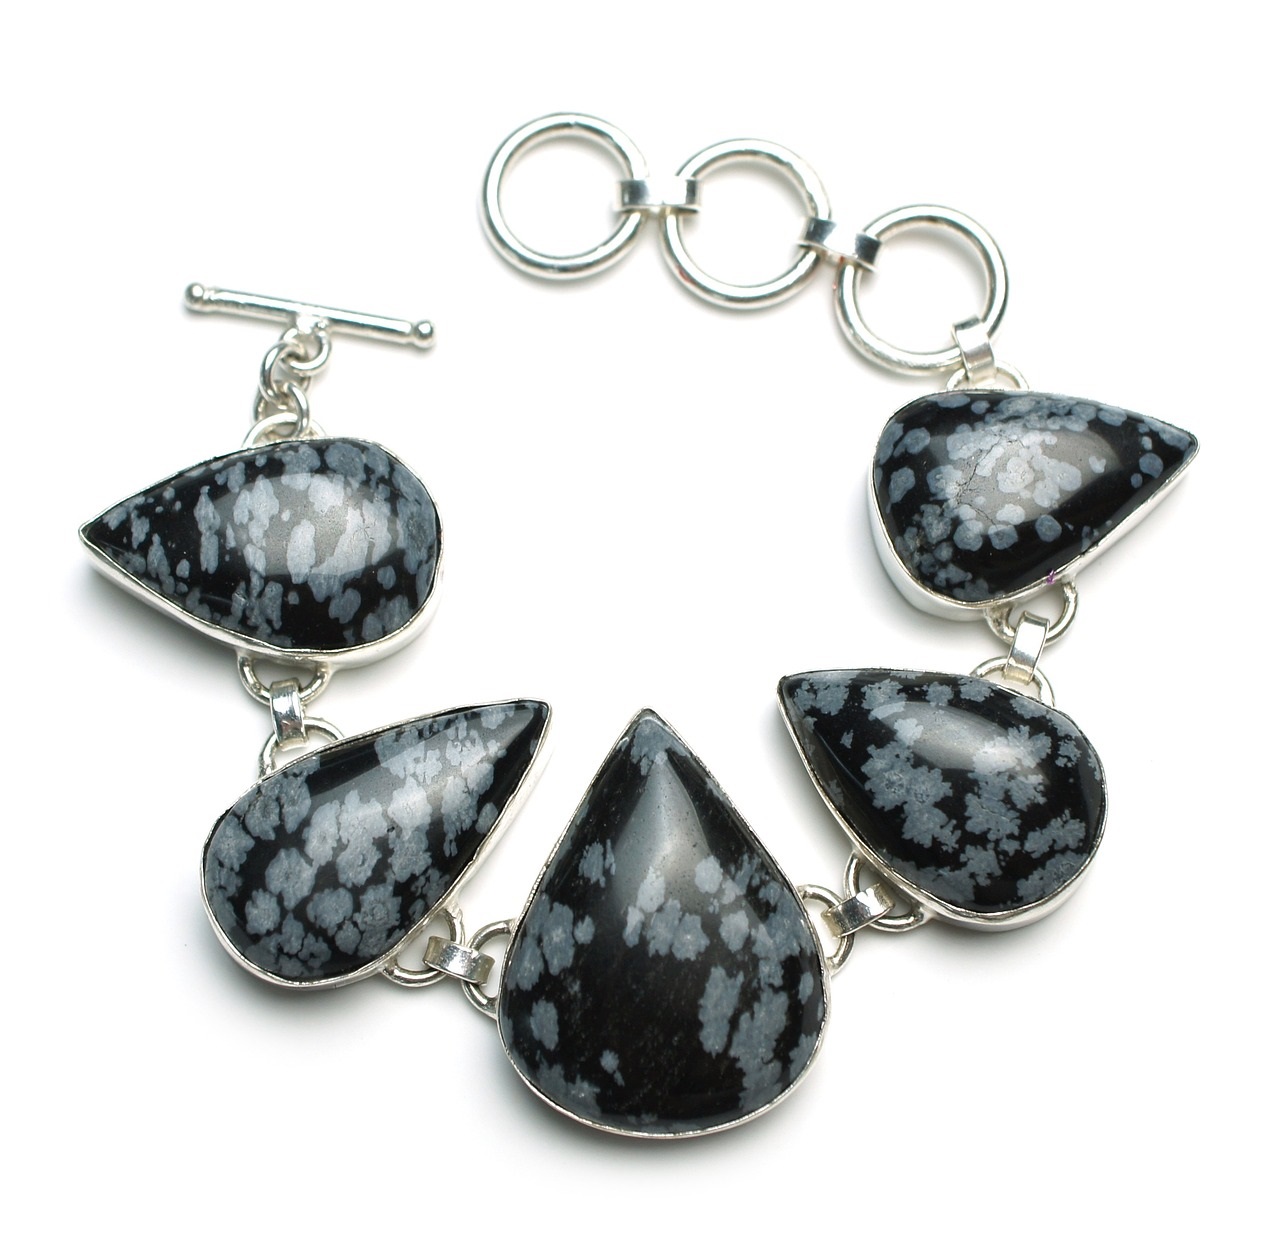 Black Gemstones - Stones In Black Shades And Mixed Colors